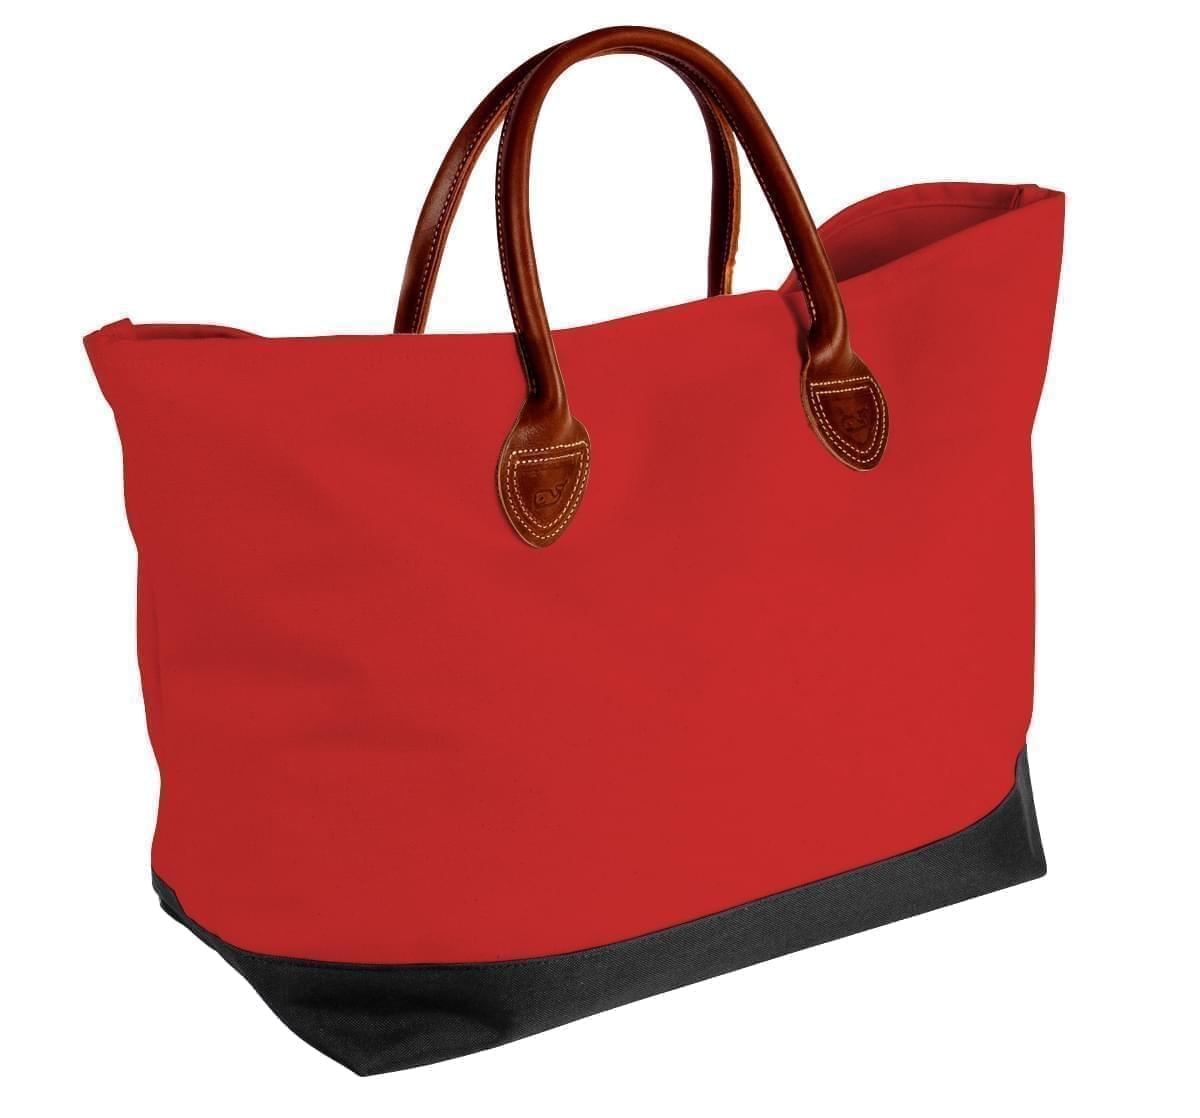 USA Made Canvas Leather Handle Totes, 10899-12C